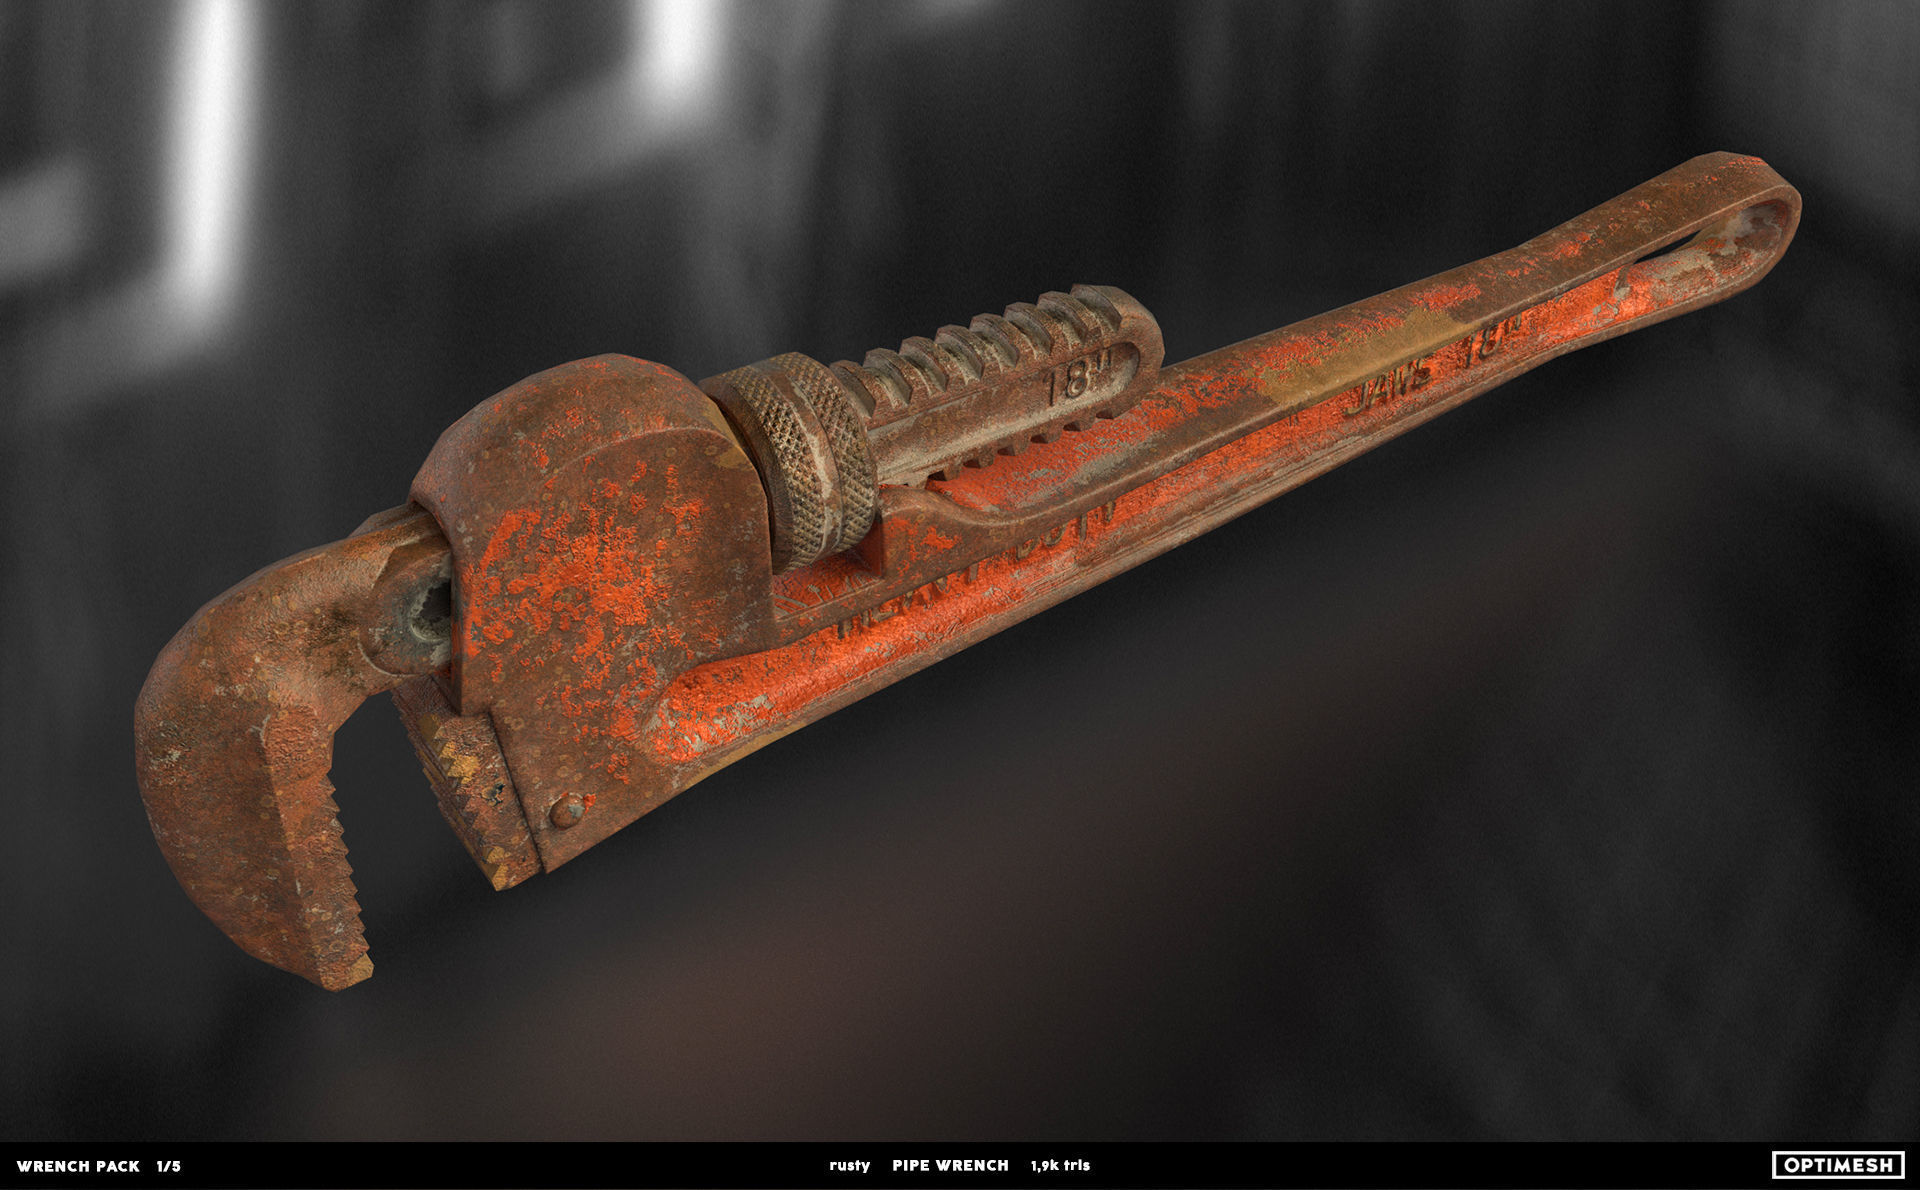 realtime Pipe wrench - 3D PBR model | CGTrader